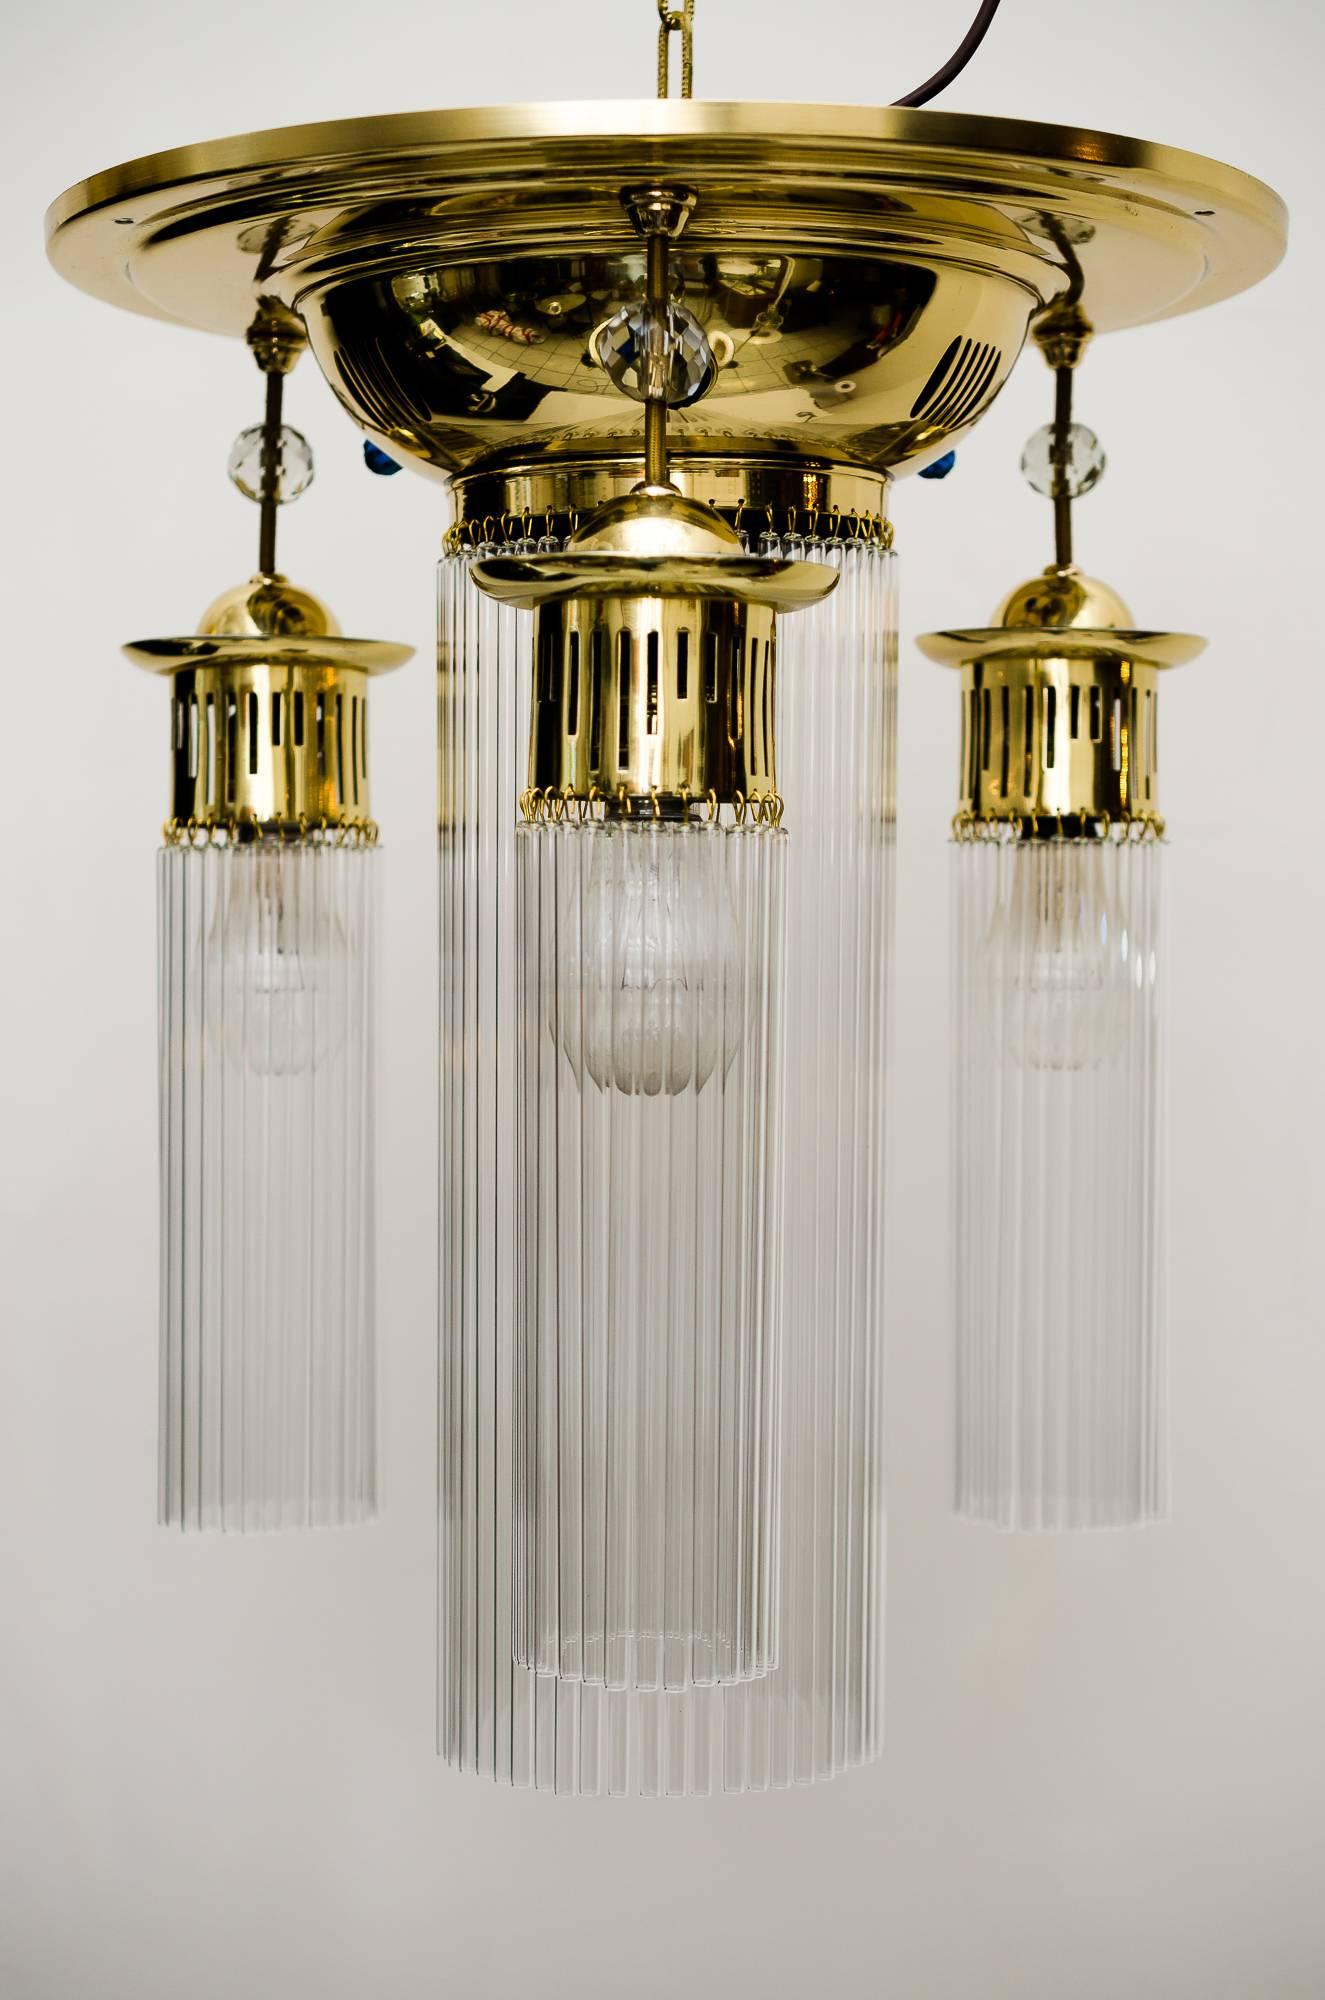 Austrian Art Deco Ceiling Lamp with Glass Sticks and Blue Stones